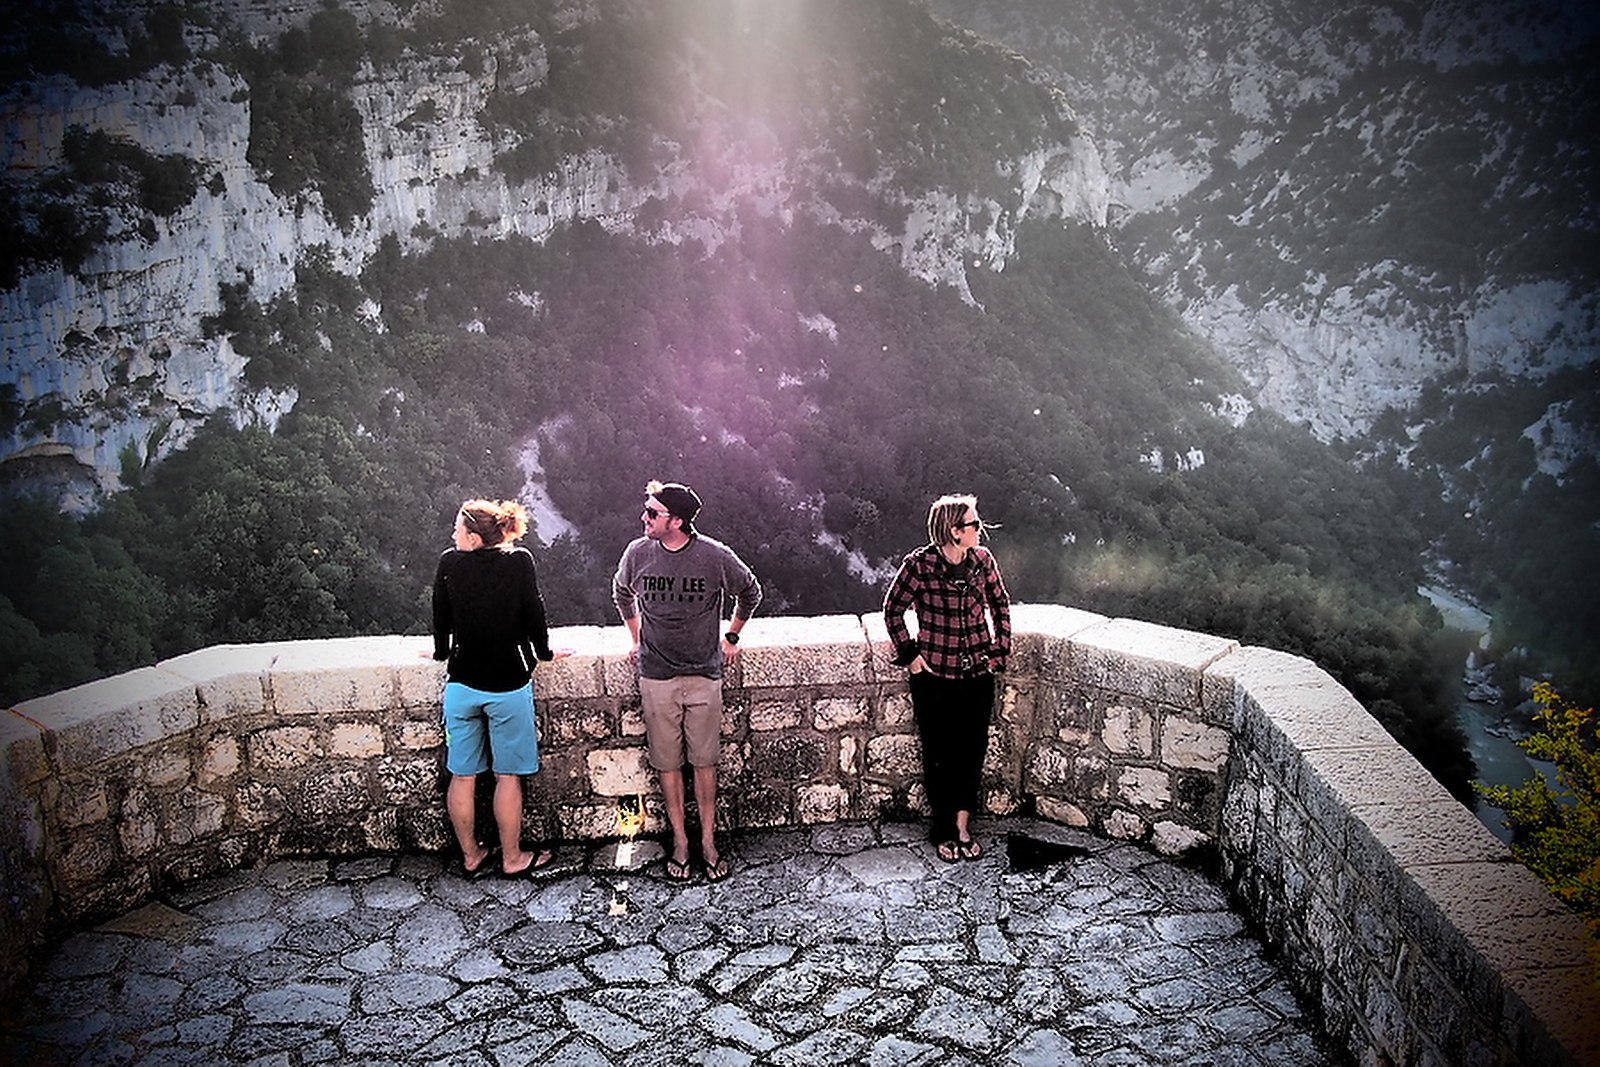 In awe of the scenery we stumble upon. Checking out the gorges with JC & Christine.